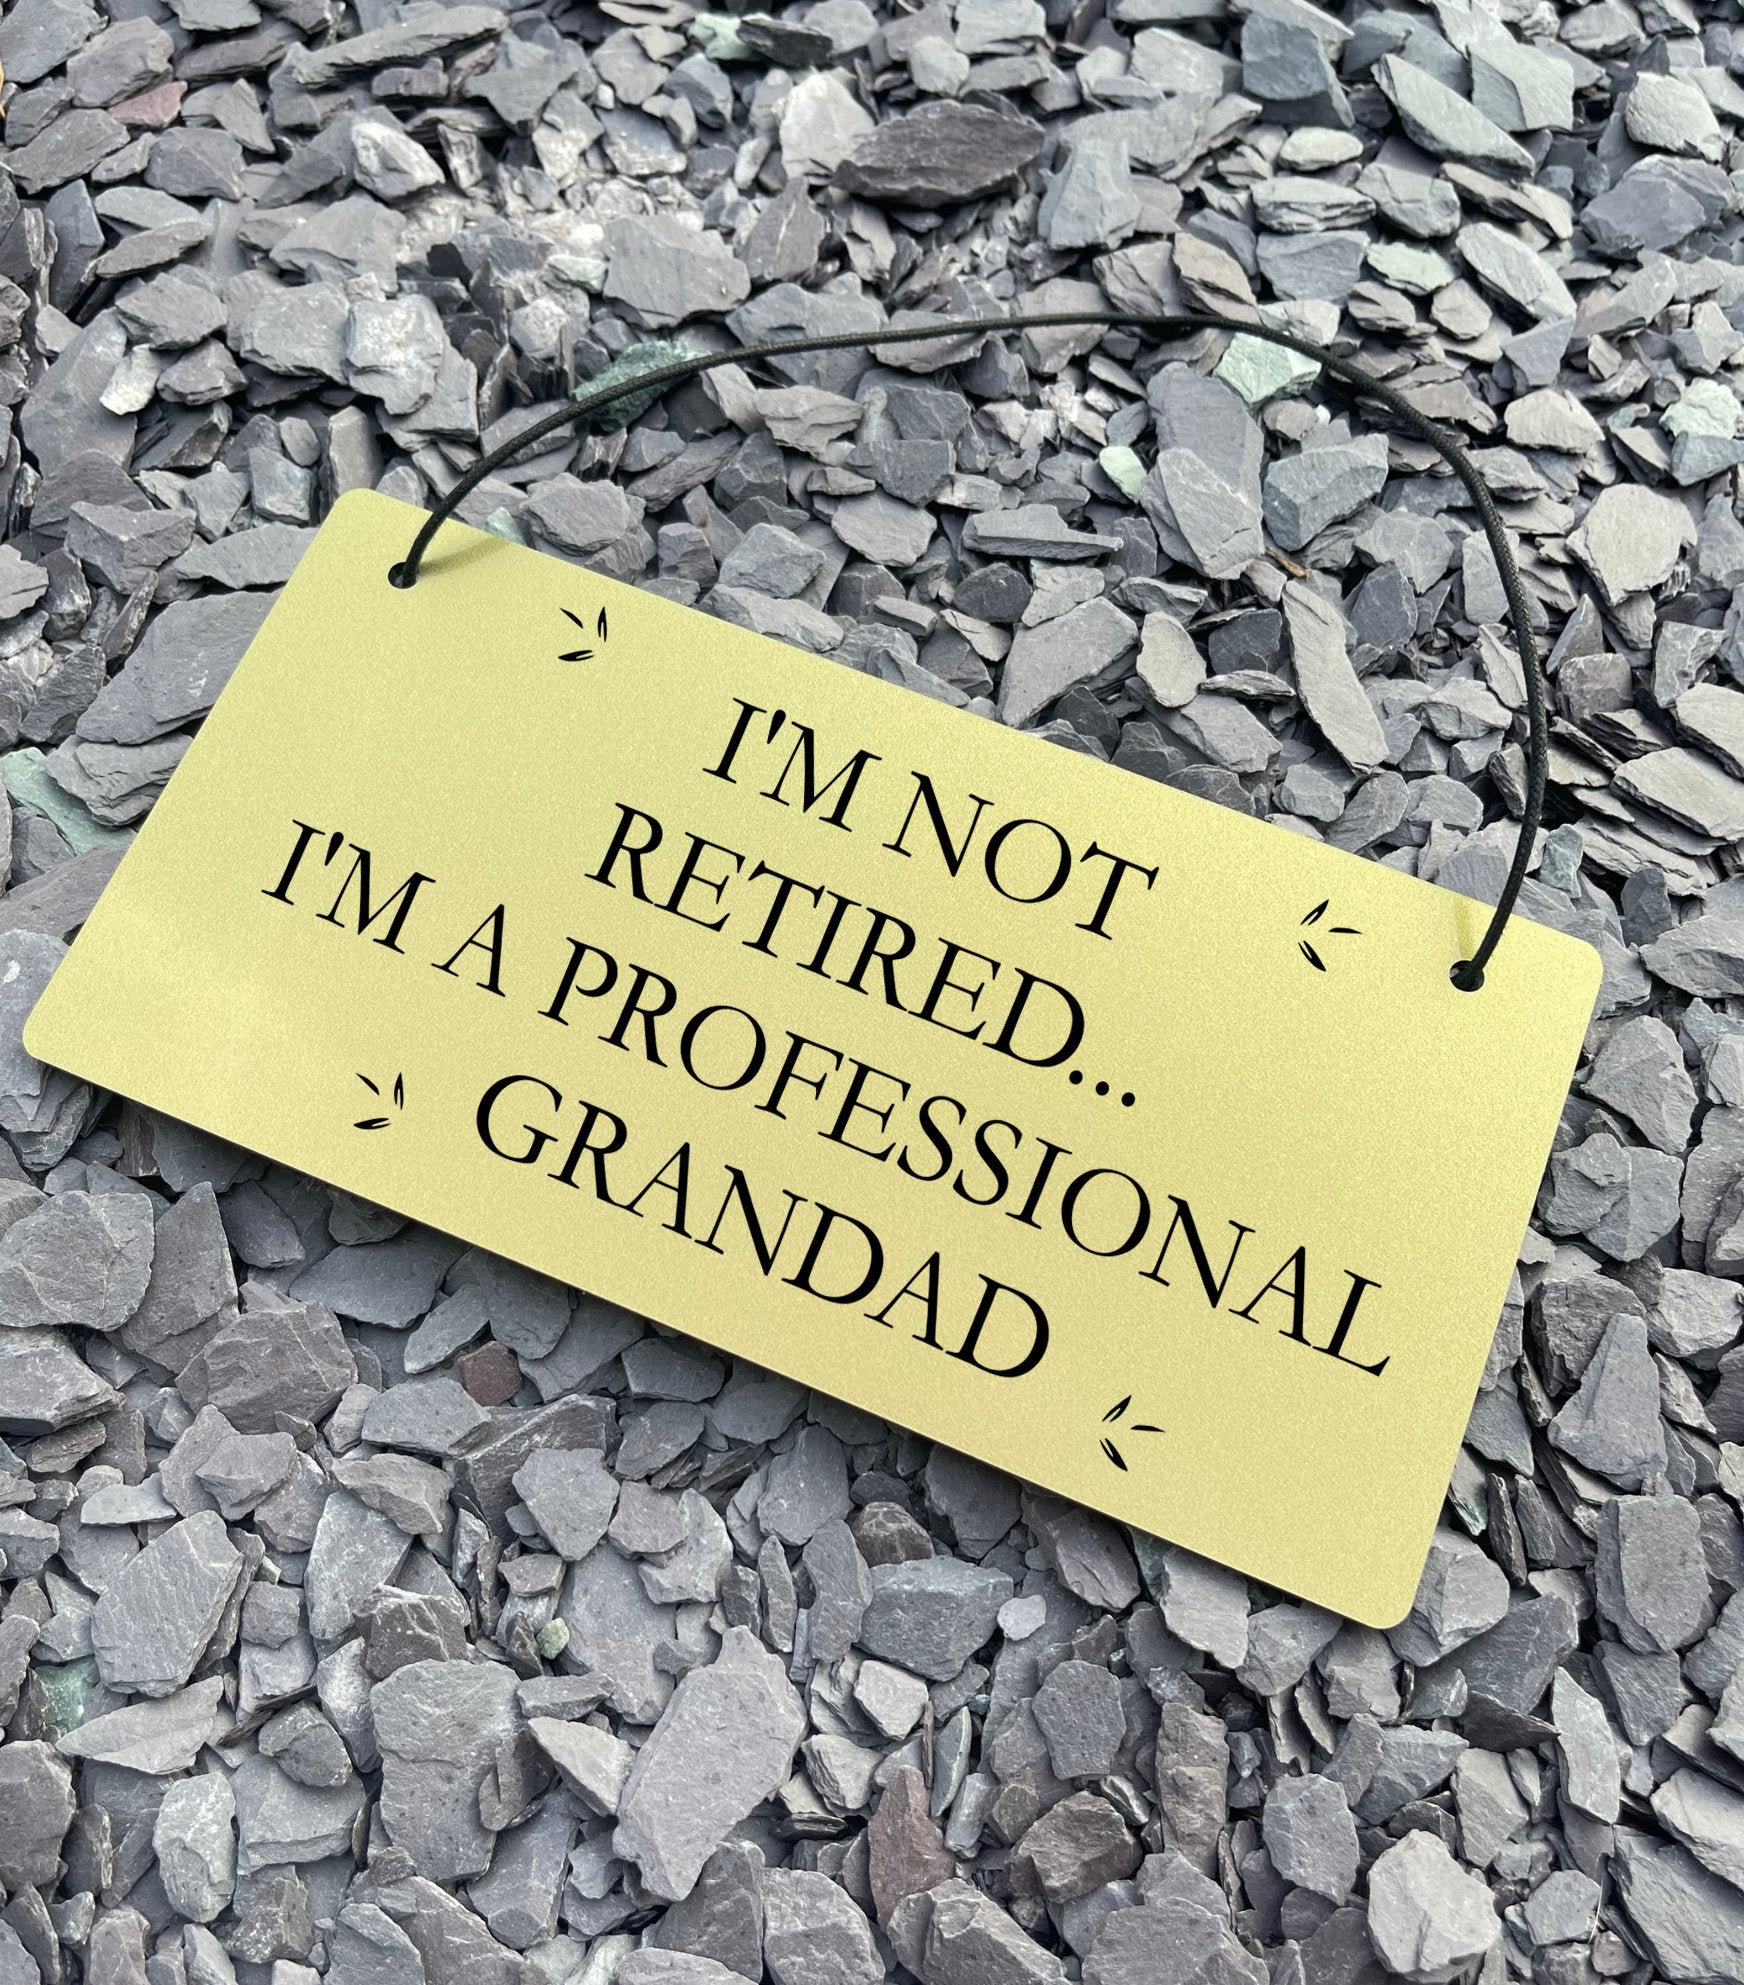 Personalised Engraved Sign for Grandads in Stunning Gold Color - Custom Acrylic Sign with Durable Engraving